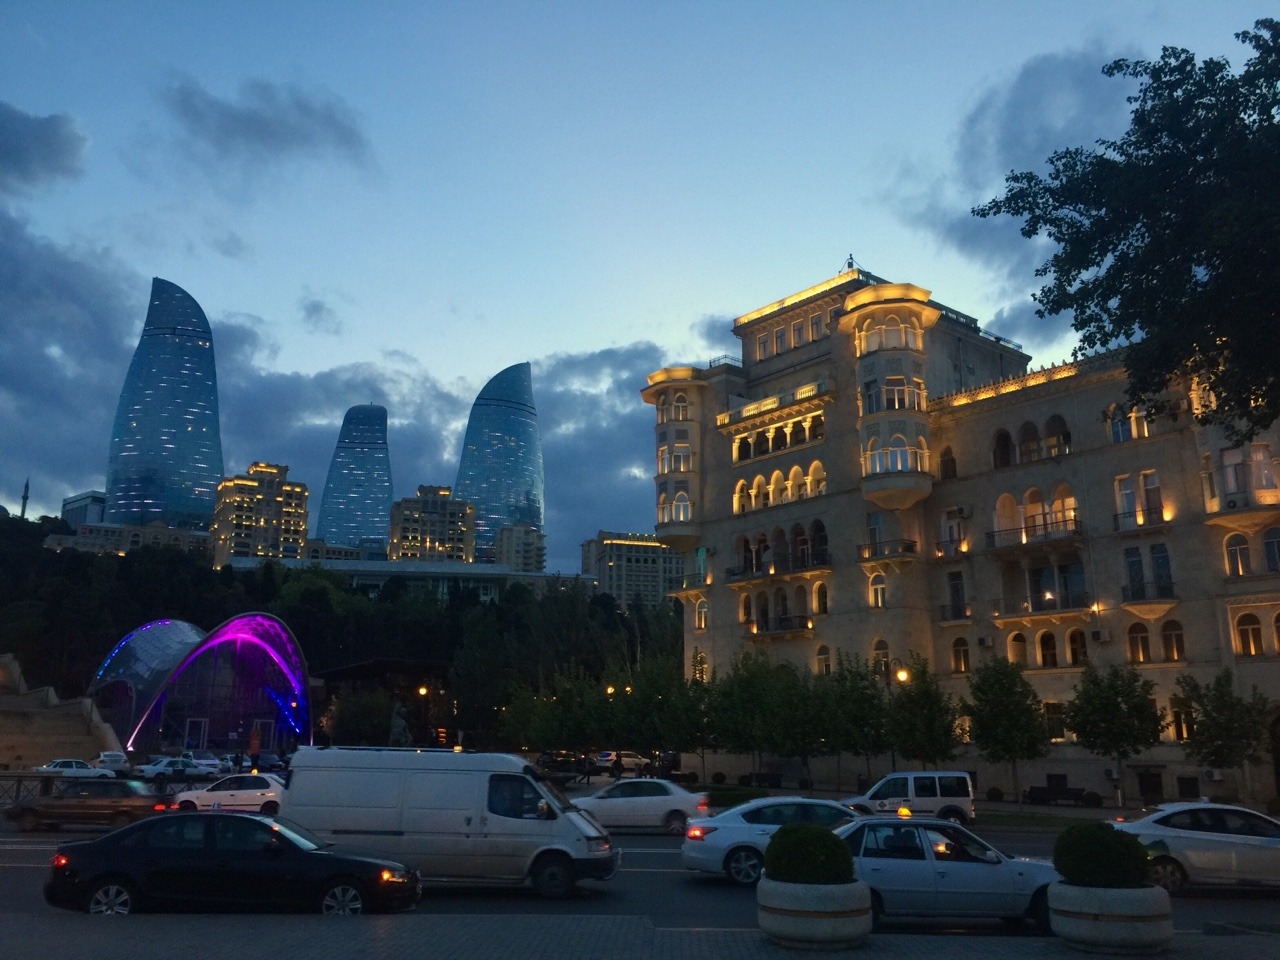 Baku is a city of contrast. Captured by this photo is the architectural tolerance of ancient buildings and the cutting edge modern skyscrapers. Baku features the Old City, a large portion sectioned off by medieval tall walls. Within the large gates,...